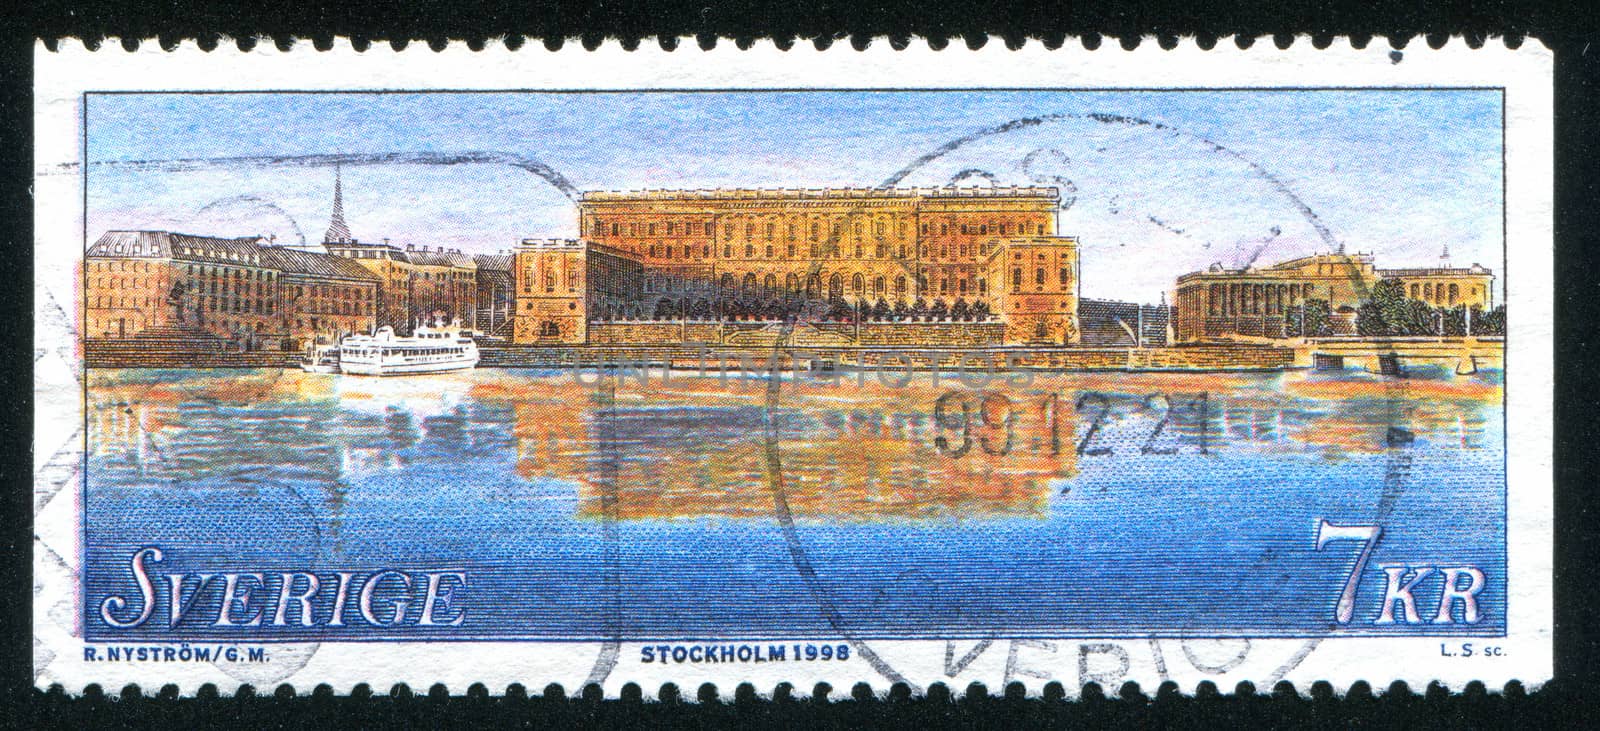 SWEDEN - CIRCA 1998: stamp printed by Sweden, shows Stockholm Palace, circa 1998